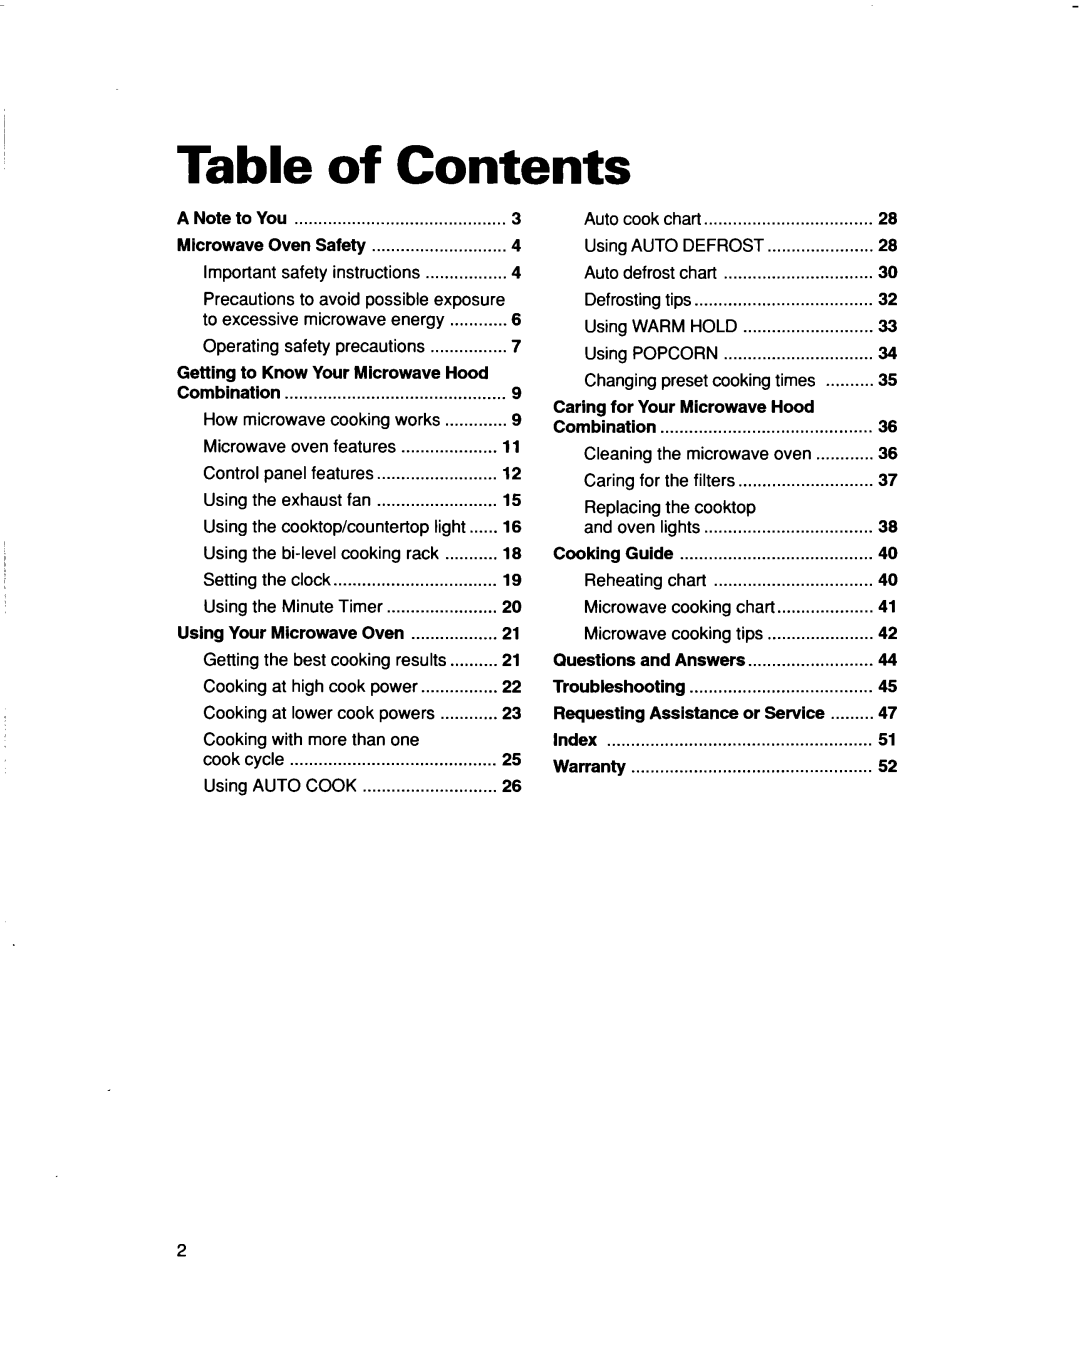 Whirlpool MHEI IRD Table of Contents, A Note to You, Getting to Know Your Microwave Hood, Combination, Guide, Questions 